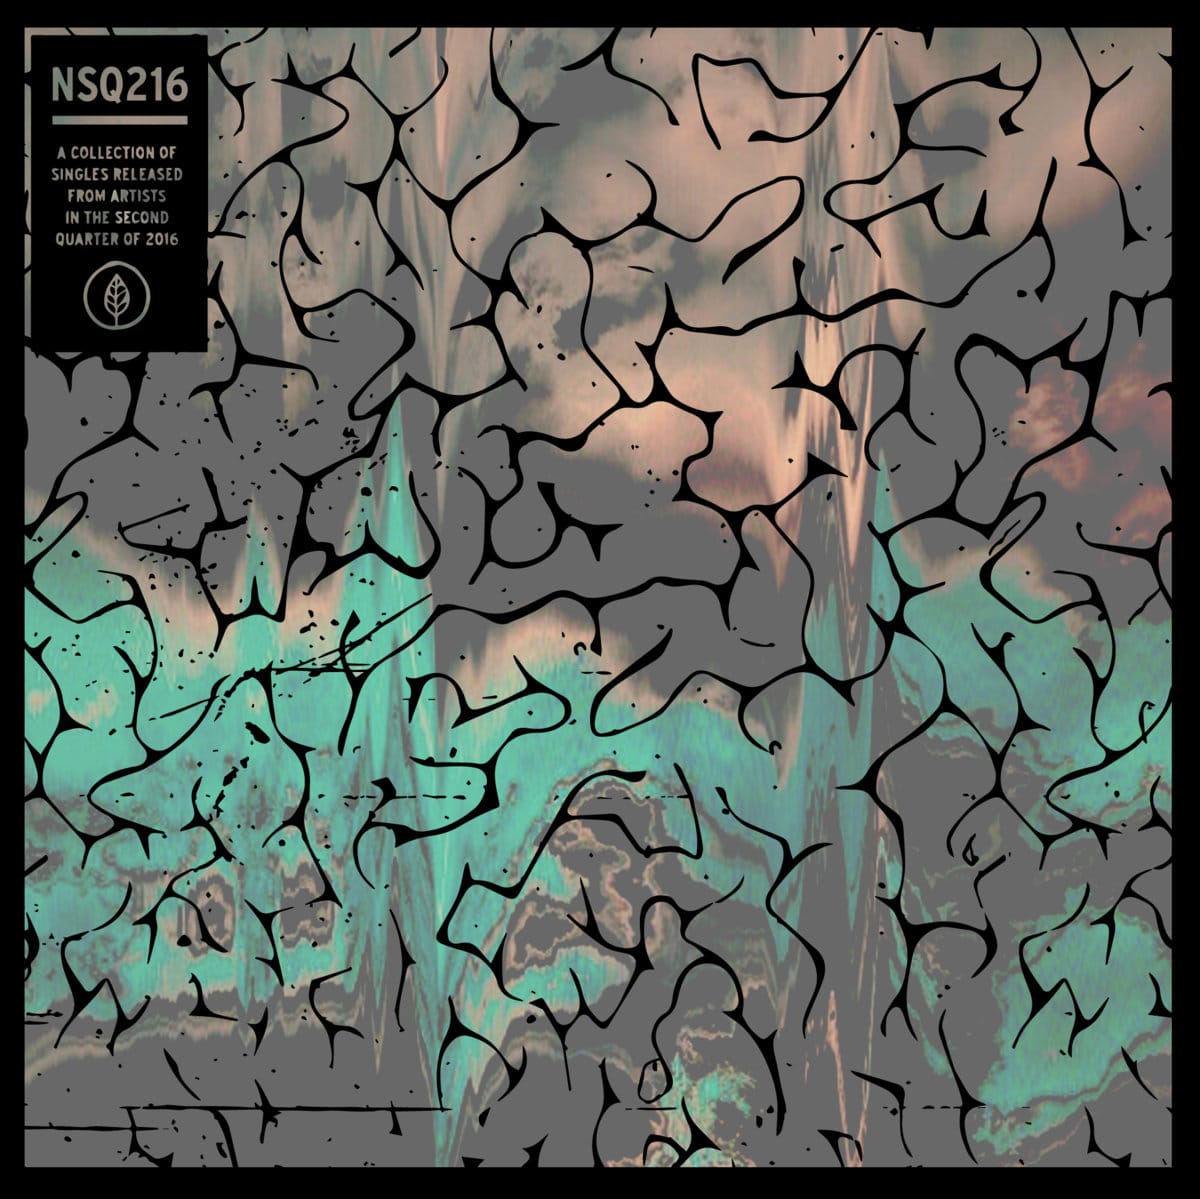 Natural Selection - "Entry 1: NSQ216" (Release)